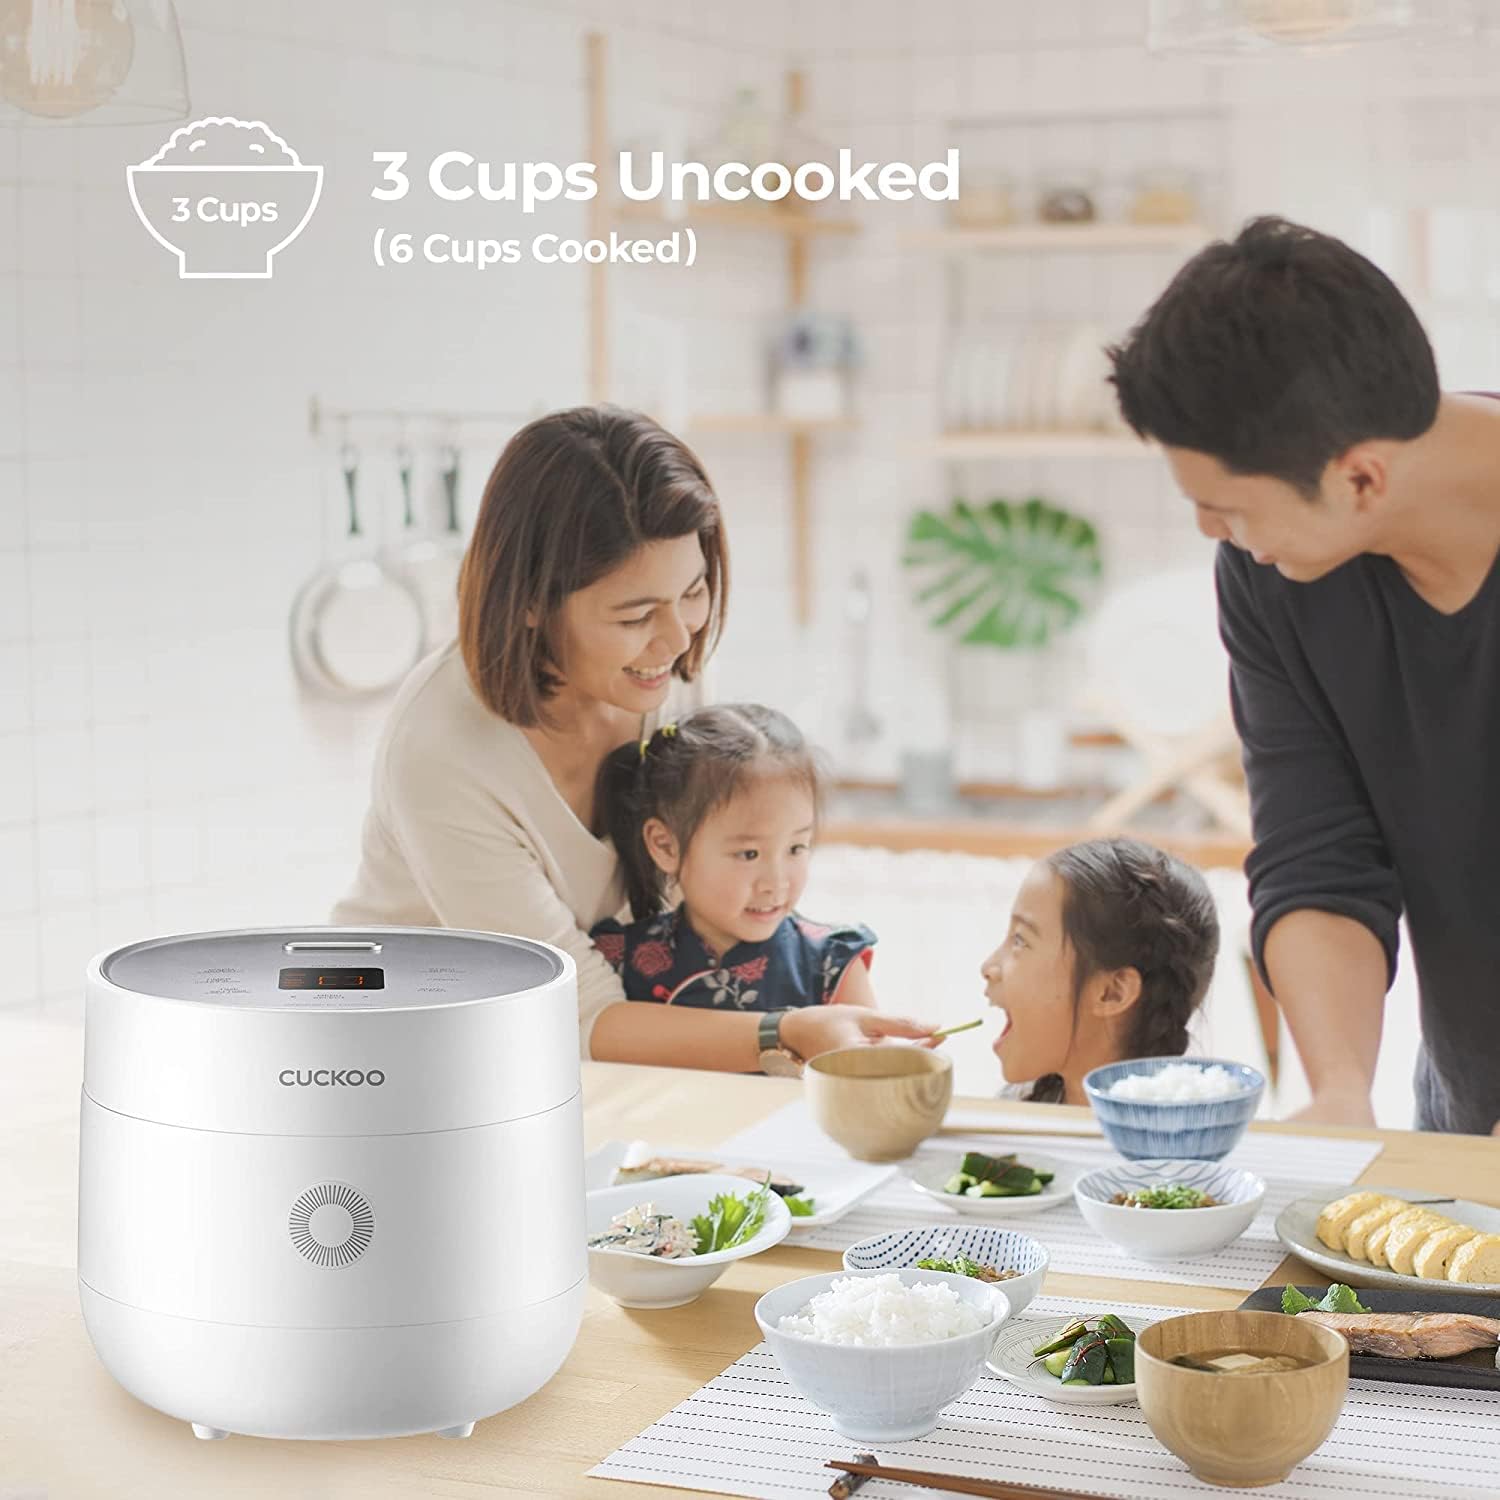 https://bigbigmart.com/wp-content/uploads/2023/08/CUCKOO-CR-0375F-3-Cup-0.75-Quart-Uncooked-Micom-Rice-Cooker-10-Menu-Options-Oatmeal-Brown-Rice-More-Touch-Screen-Nonstick-Inner-Pot-White2.jpg